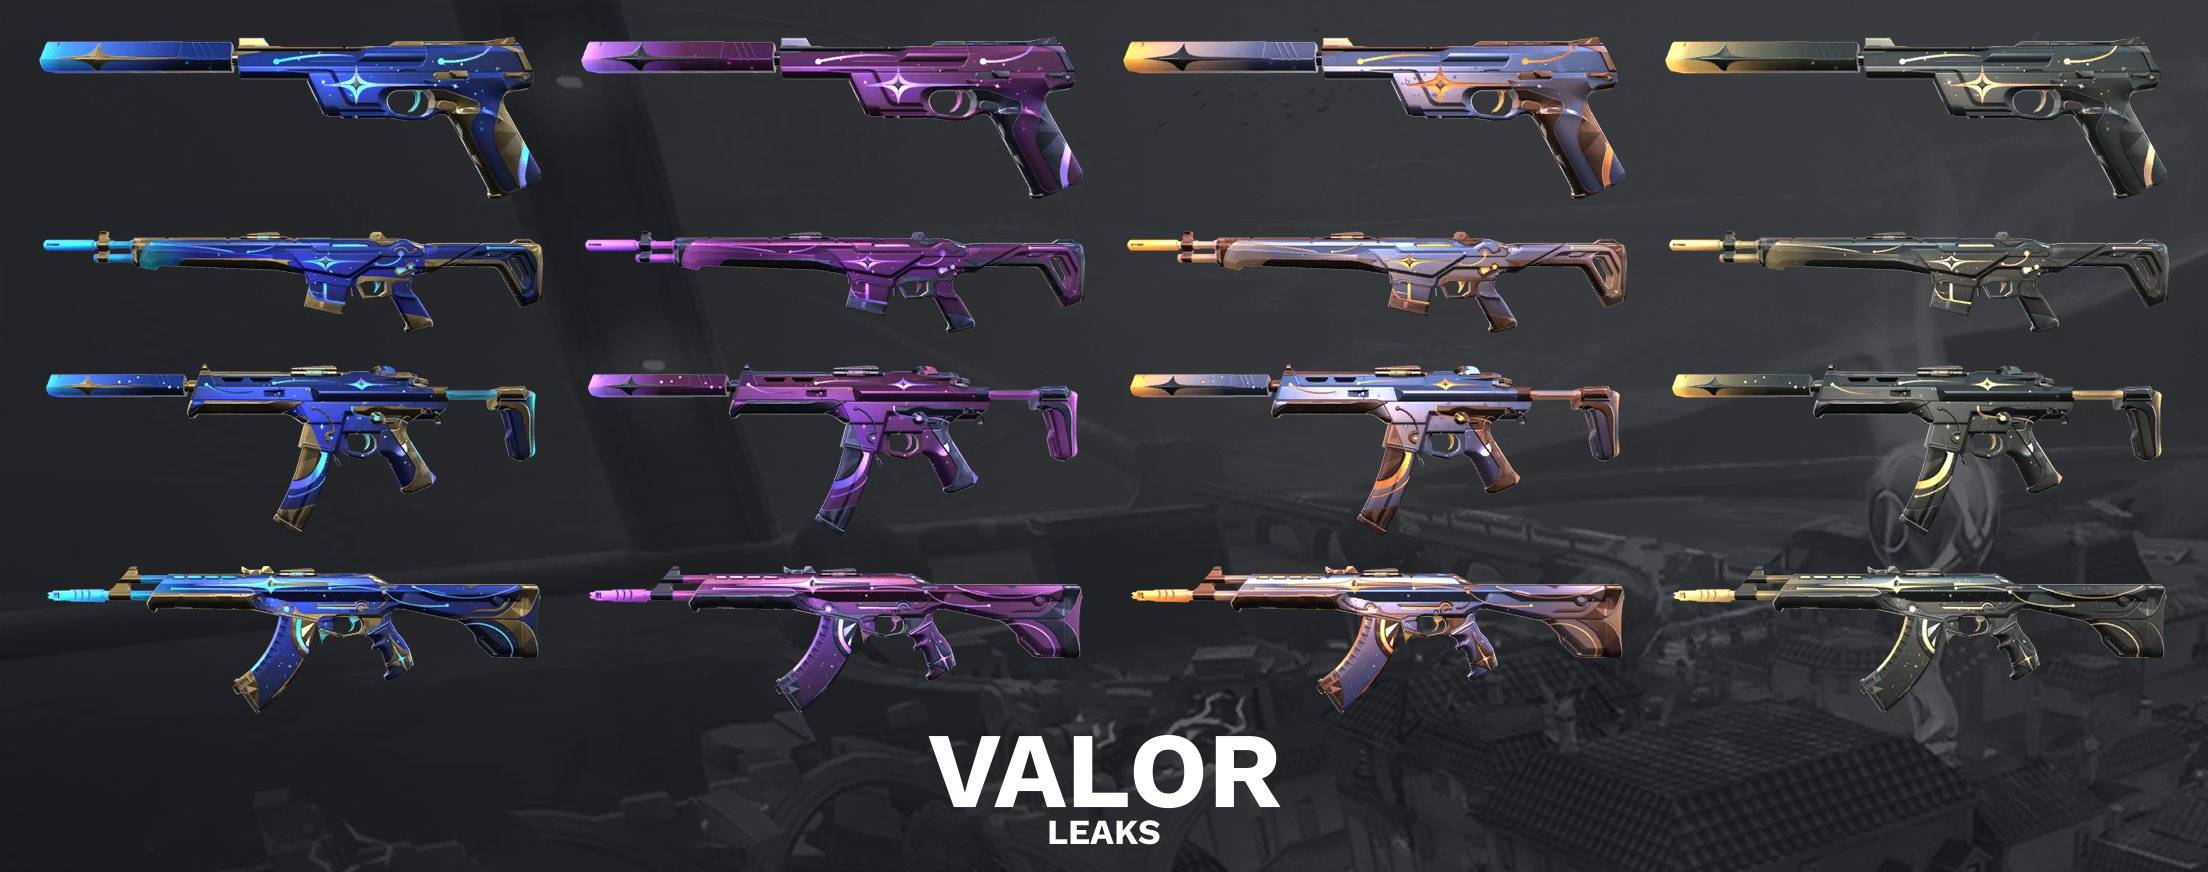 Agent Harbor, Pearl Redesigns, and Gameplay Changes – Patch 5.08 Details.  VALORANT news - eSports events review, analytics, announcements,  interviews, statistics - MI_Muz9Qm